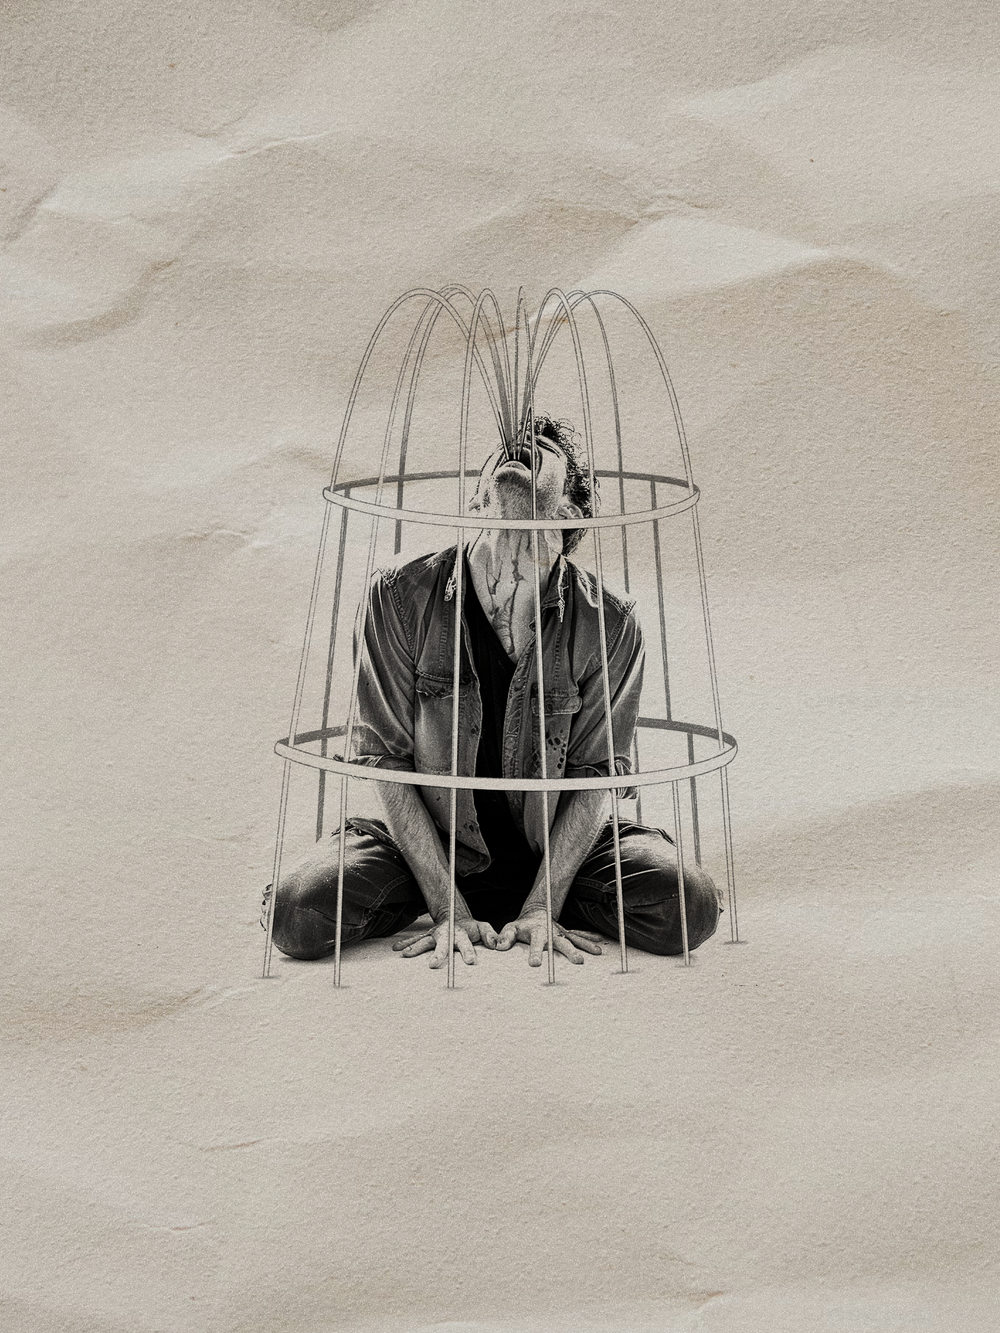 His only cage, His words